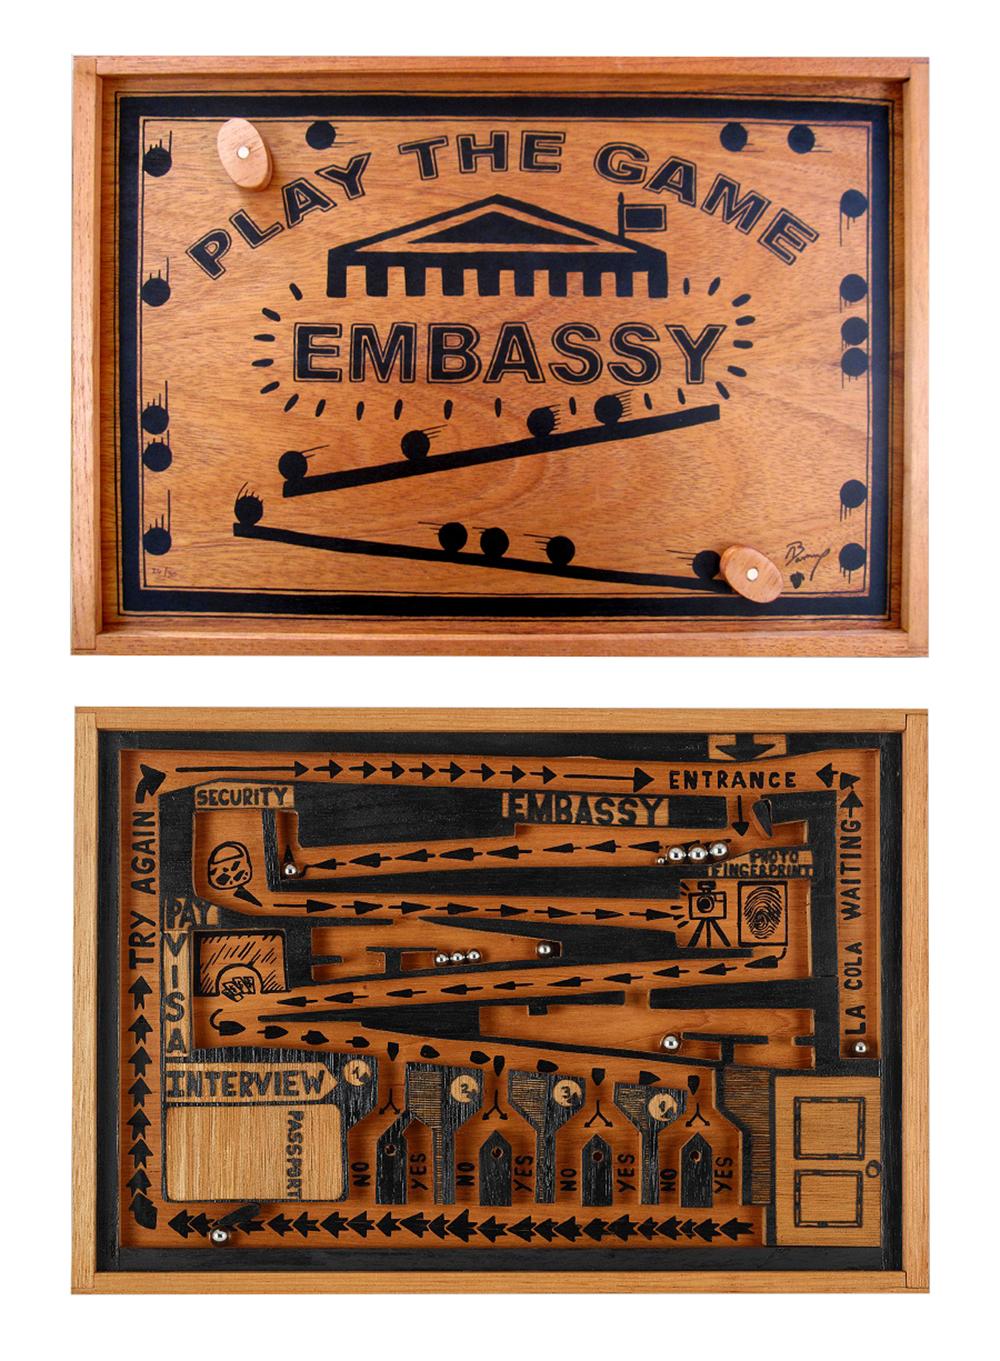 EMBASSY GAME - Mixed Media Art by Abel Barroso